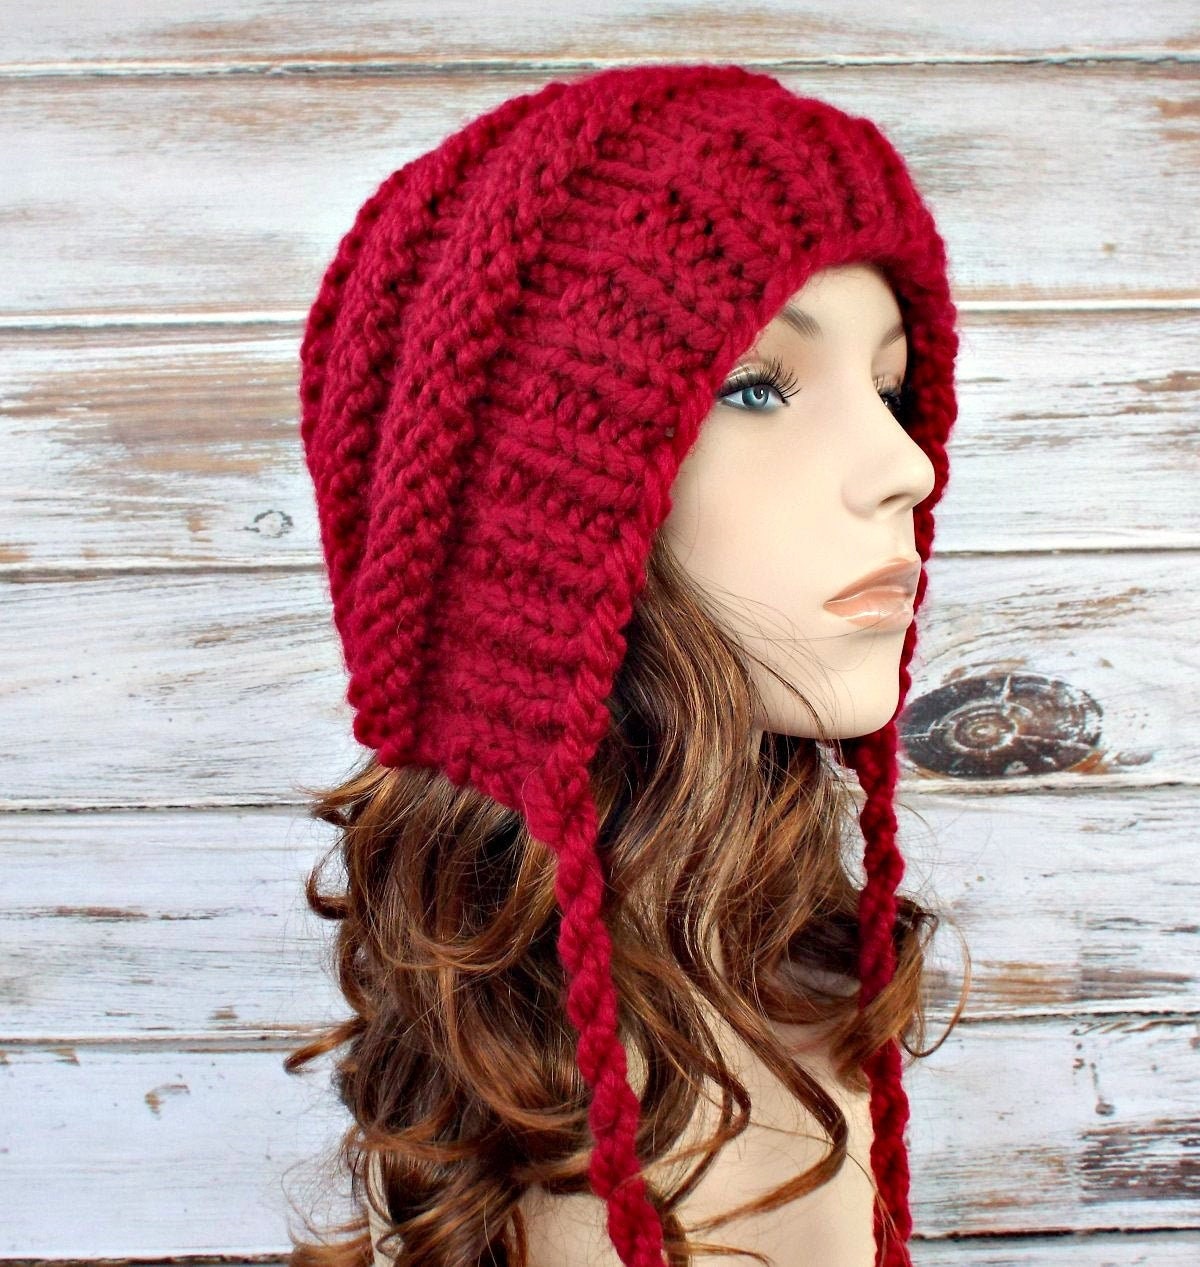 NAILAO Fashionable Women's Floral Knitted Crochet Beanie Hat Winter Warm Hat Wine Red